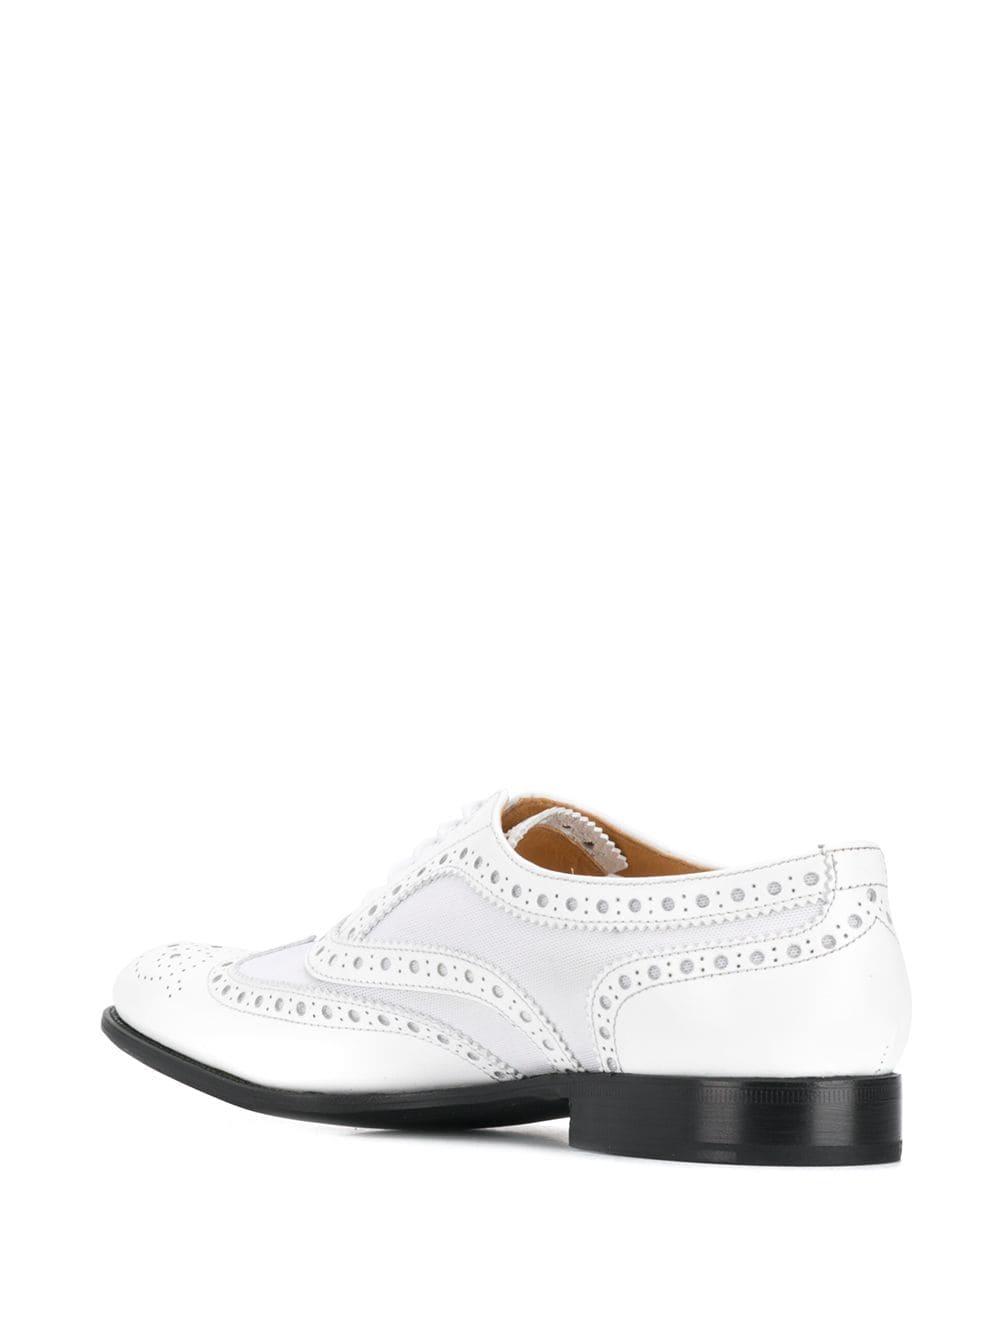 Church's Burwood 7 W Brogues in White - Lyst